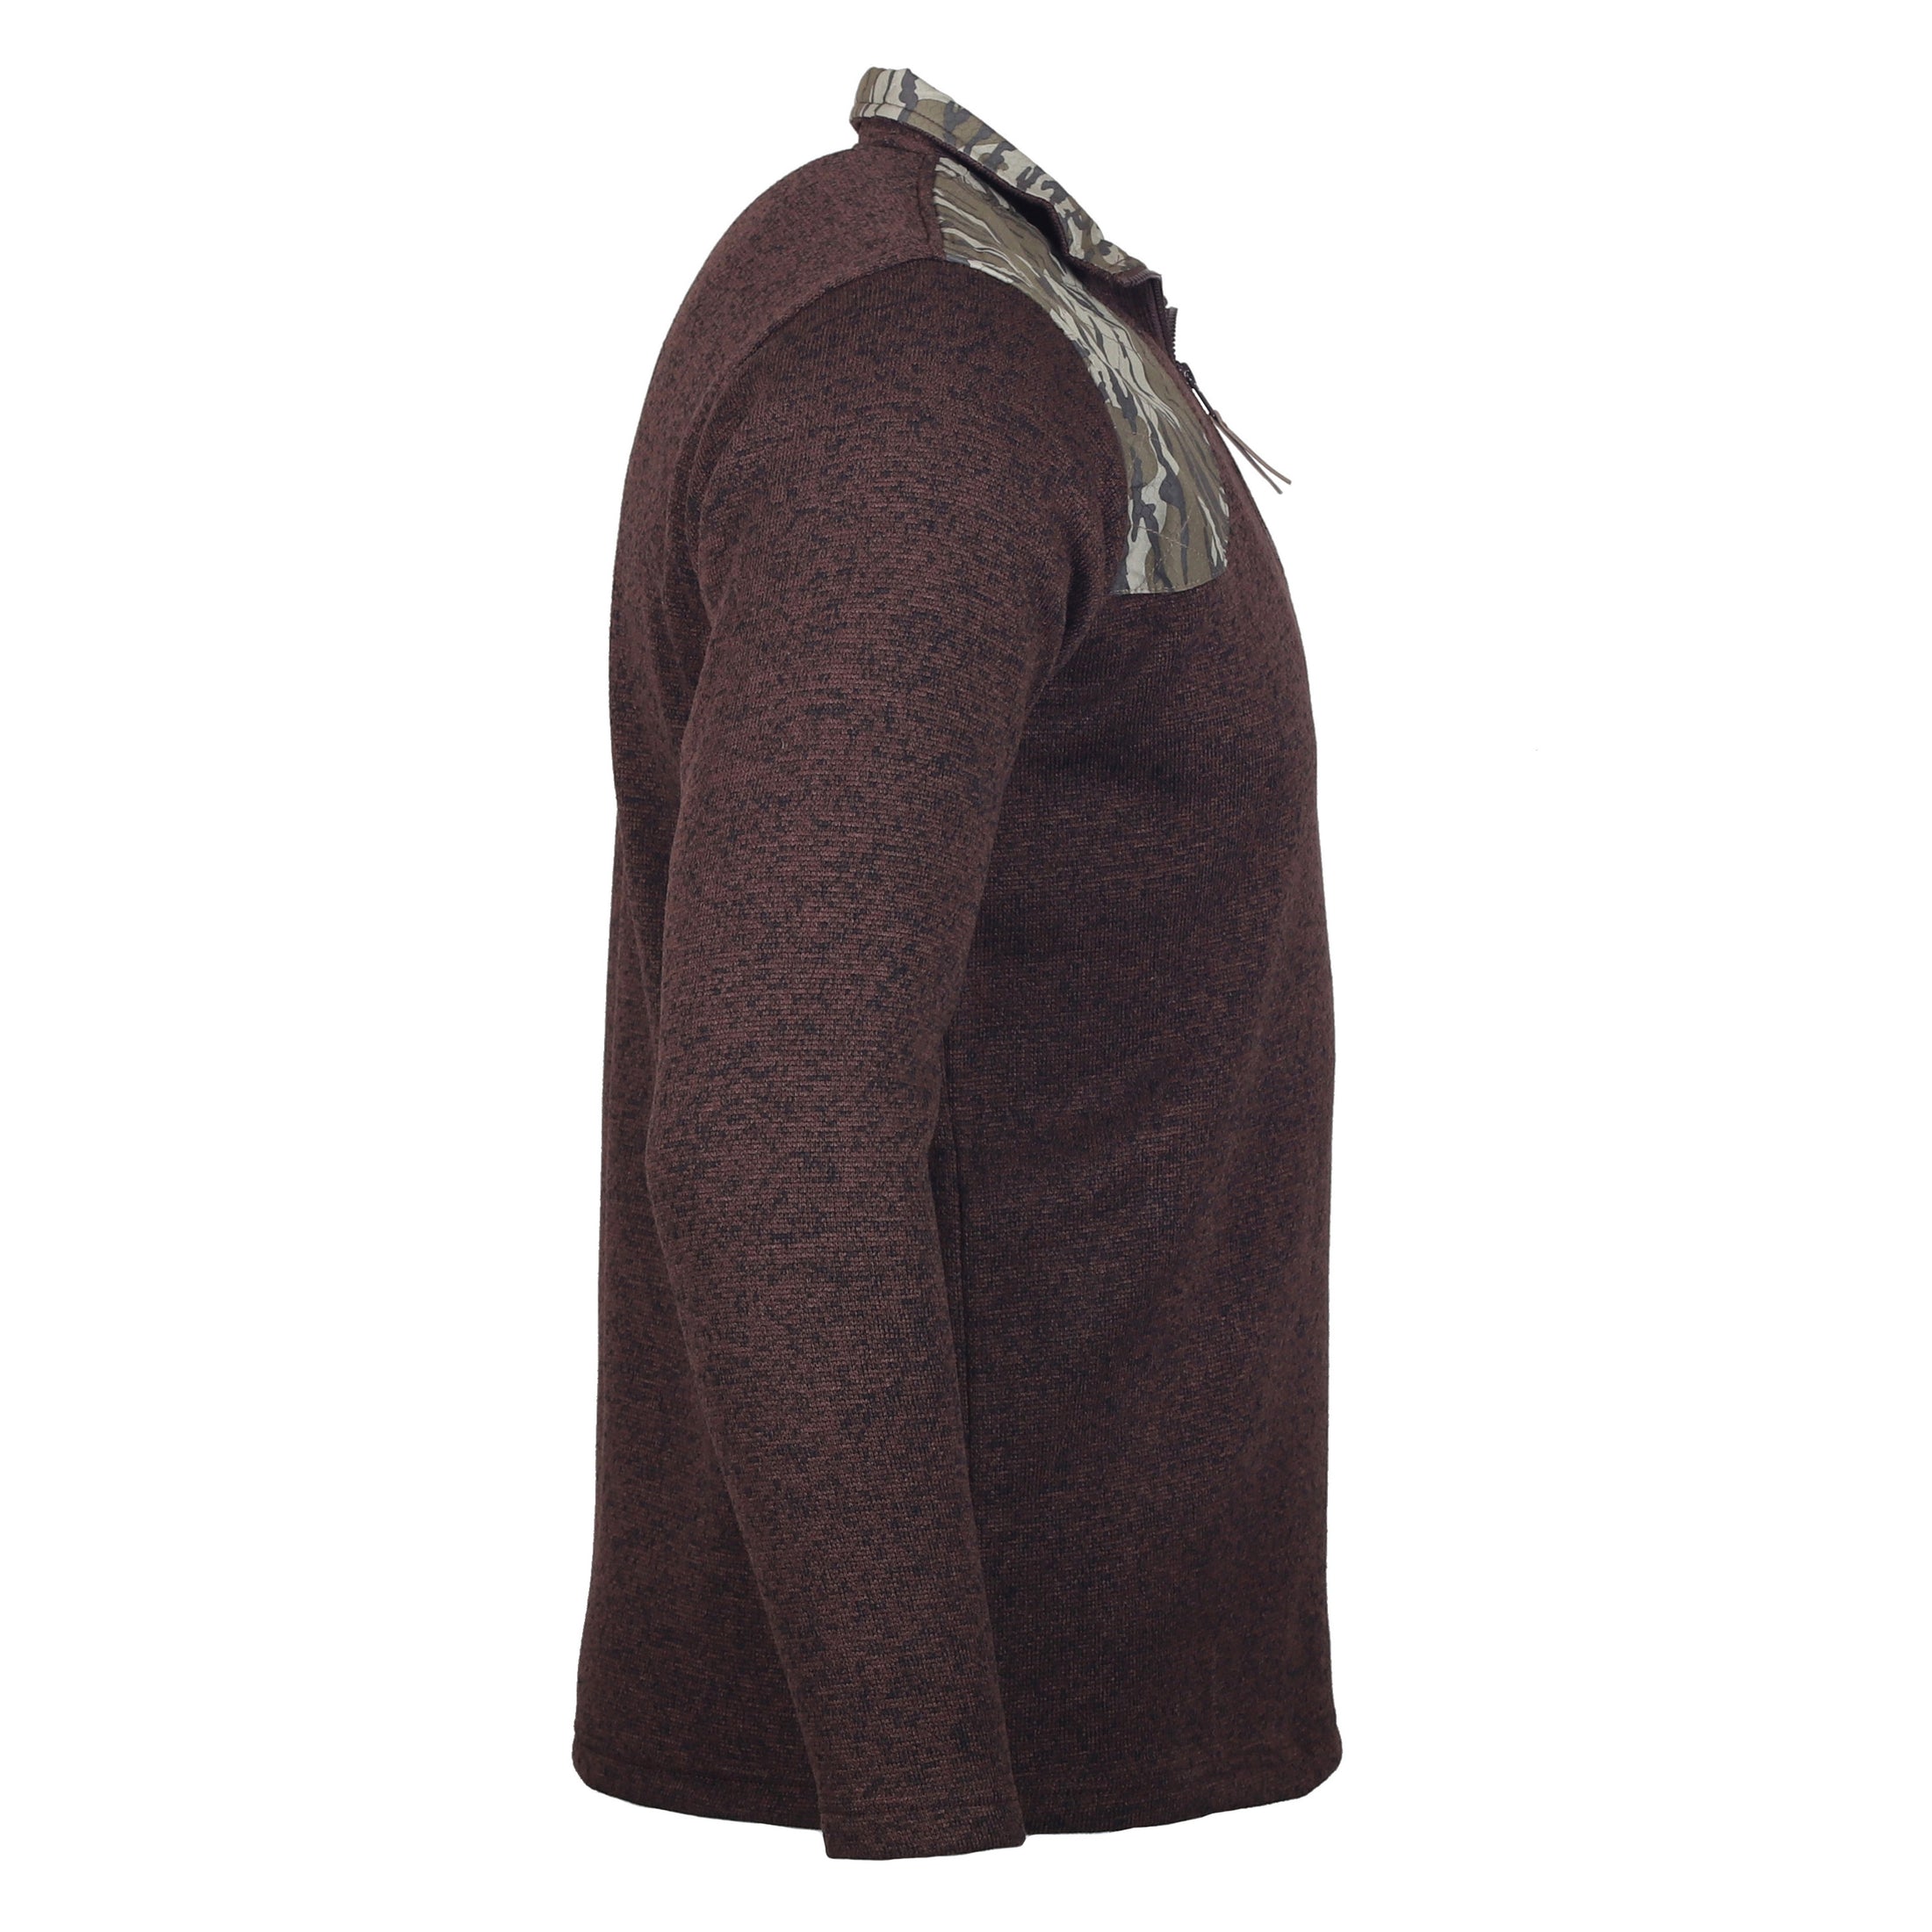 Gamekeeper wing shooter pullover side view (mud/bottomland)